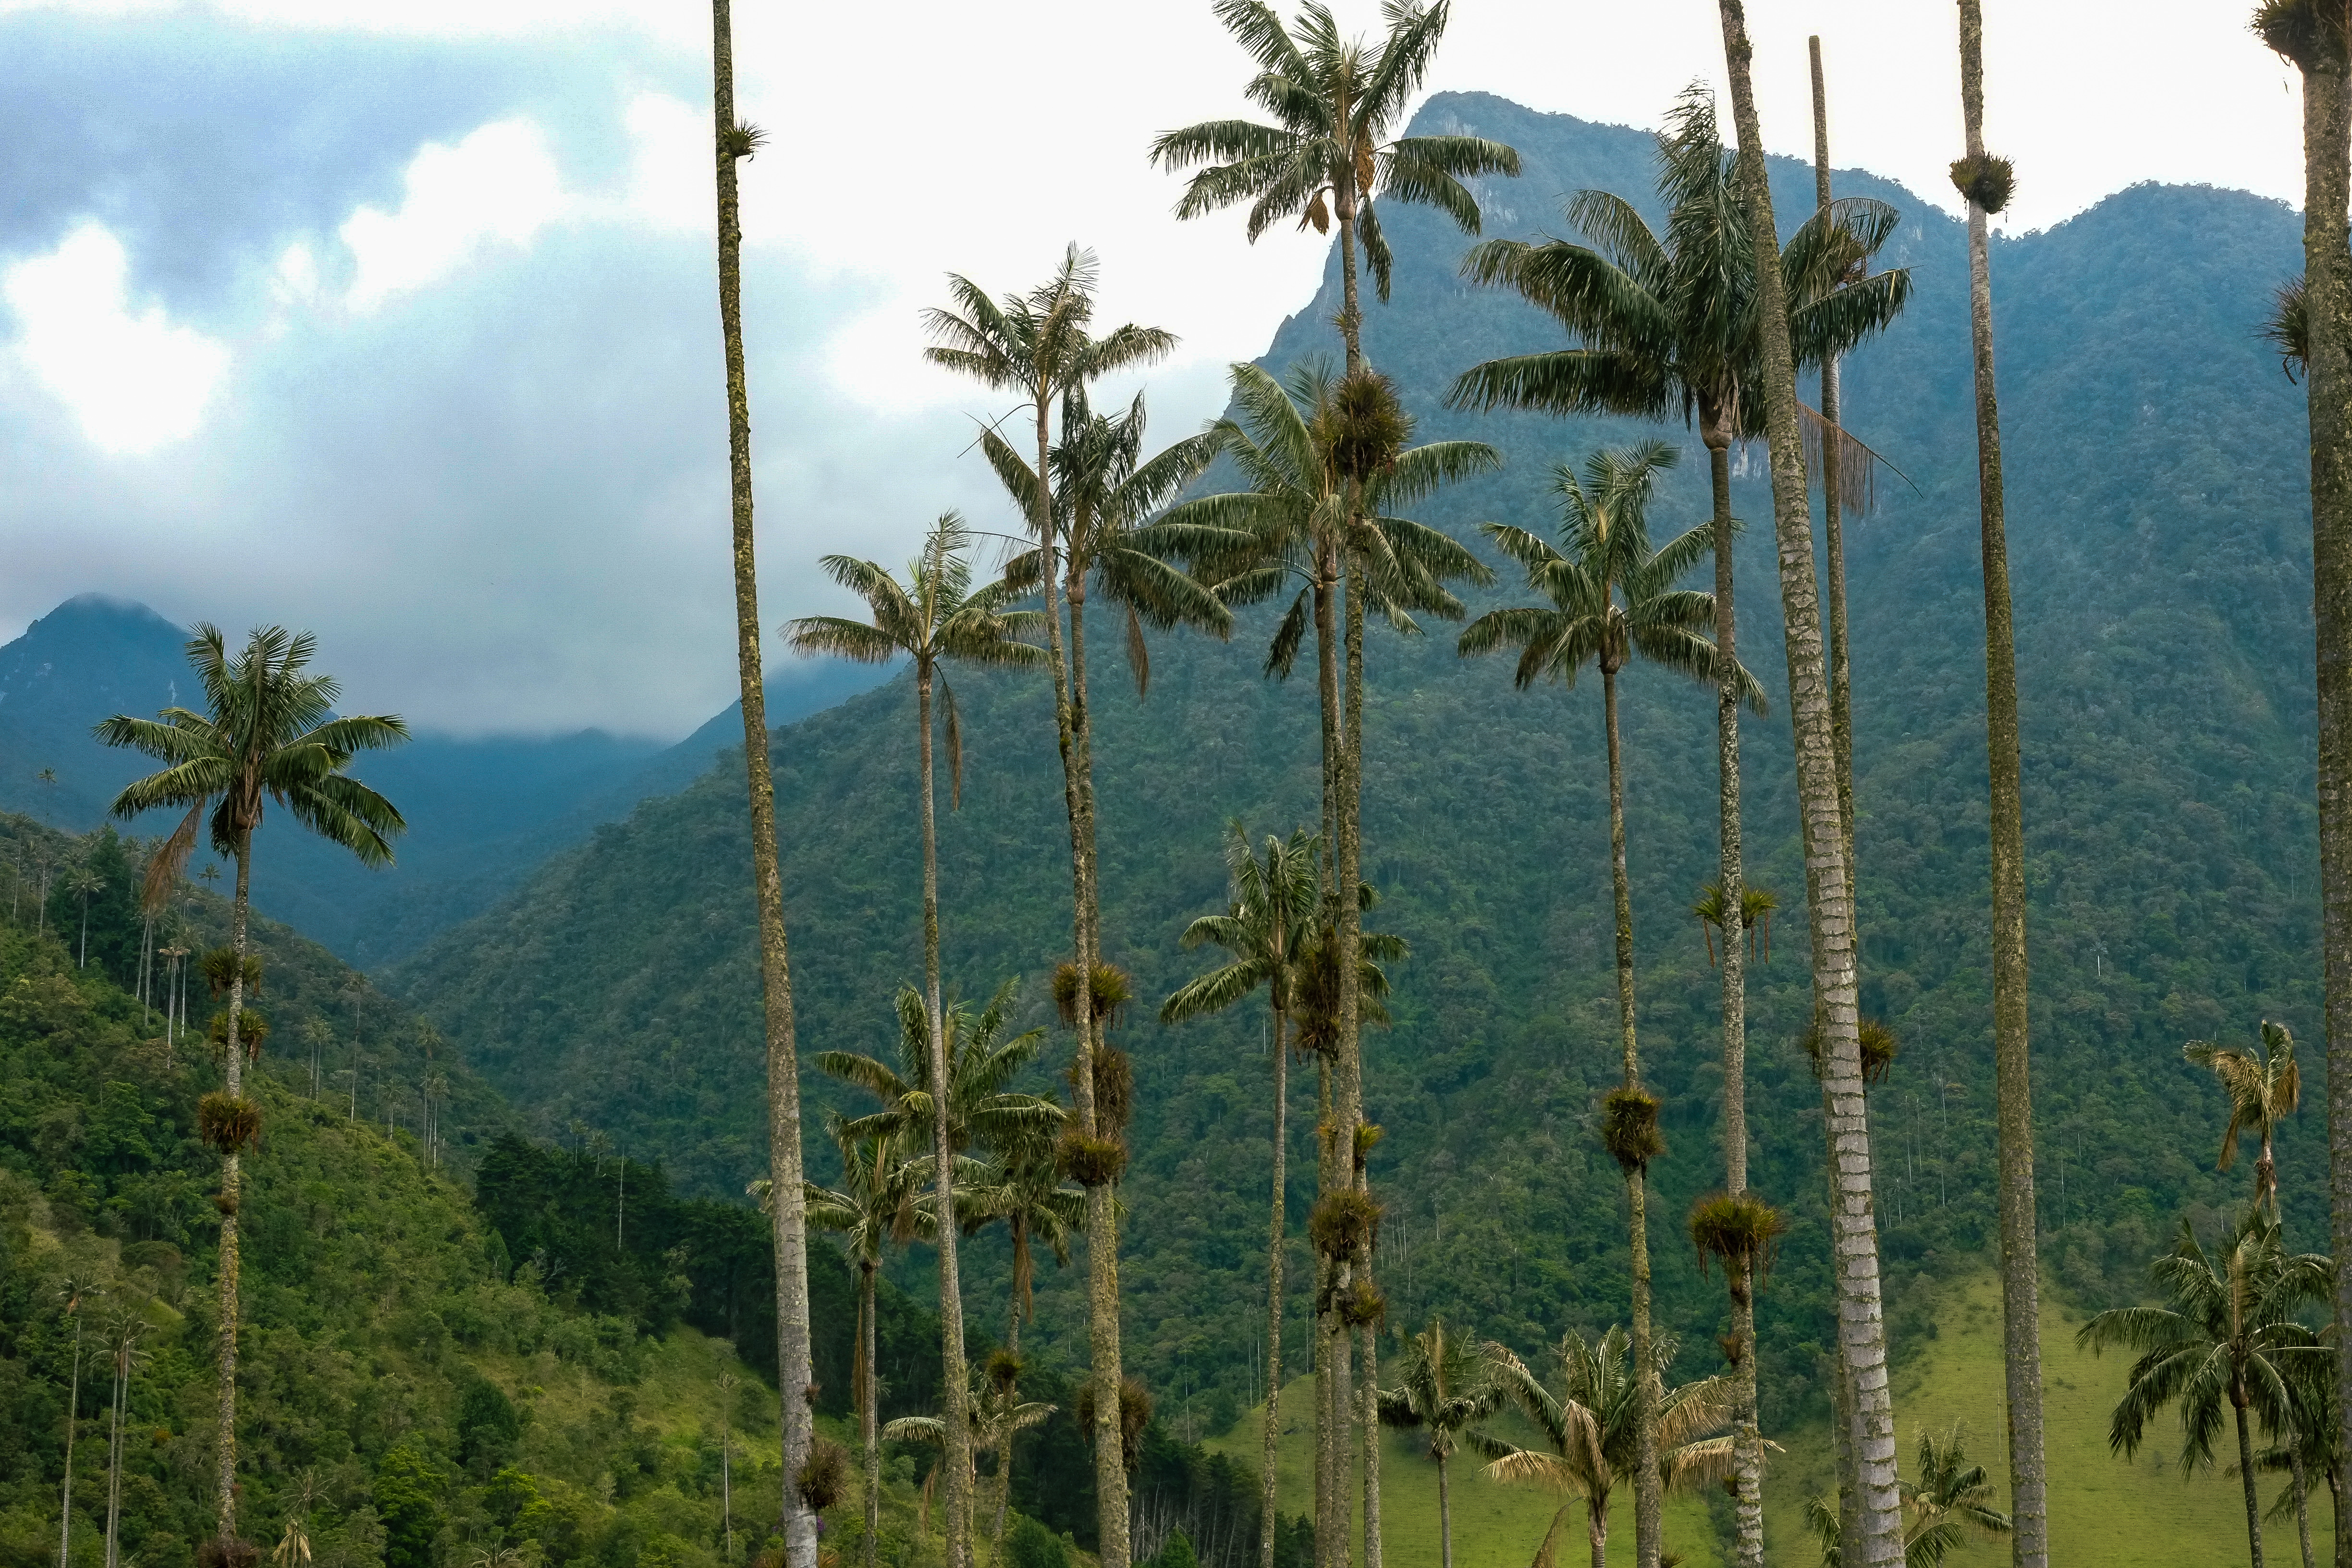 The wax palms of the Valle de Cocora